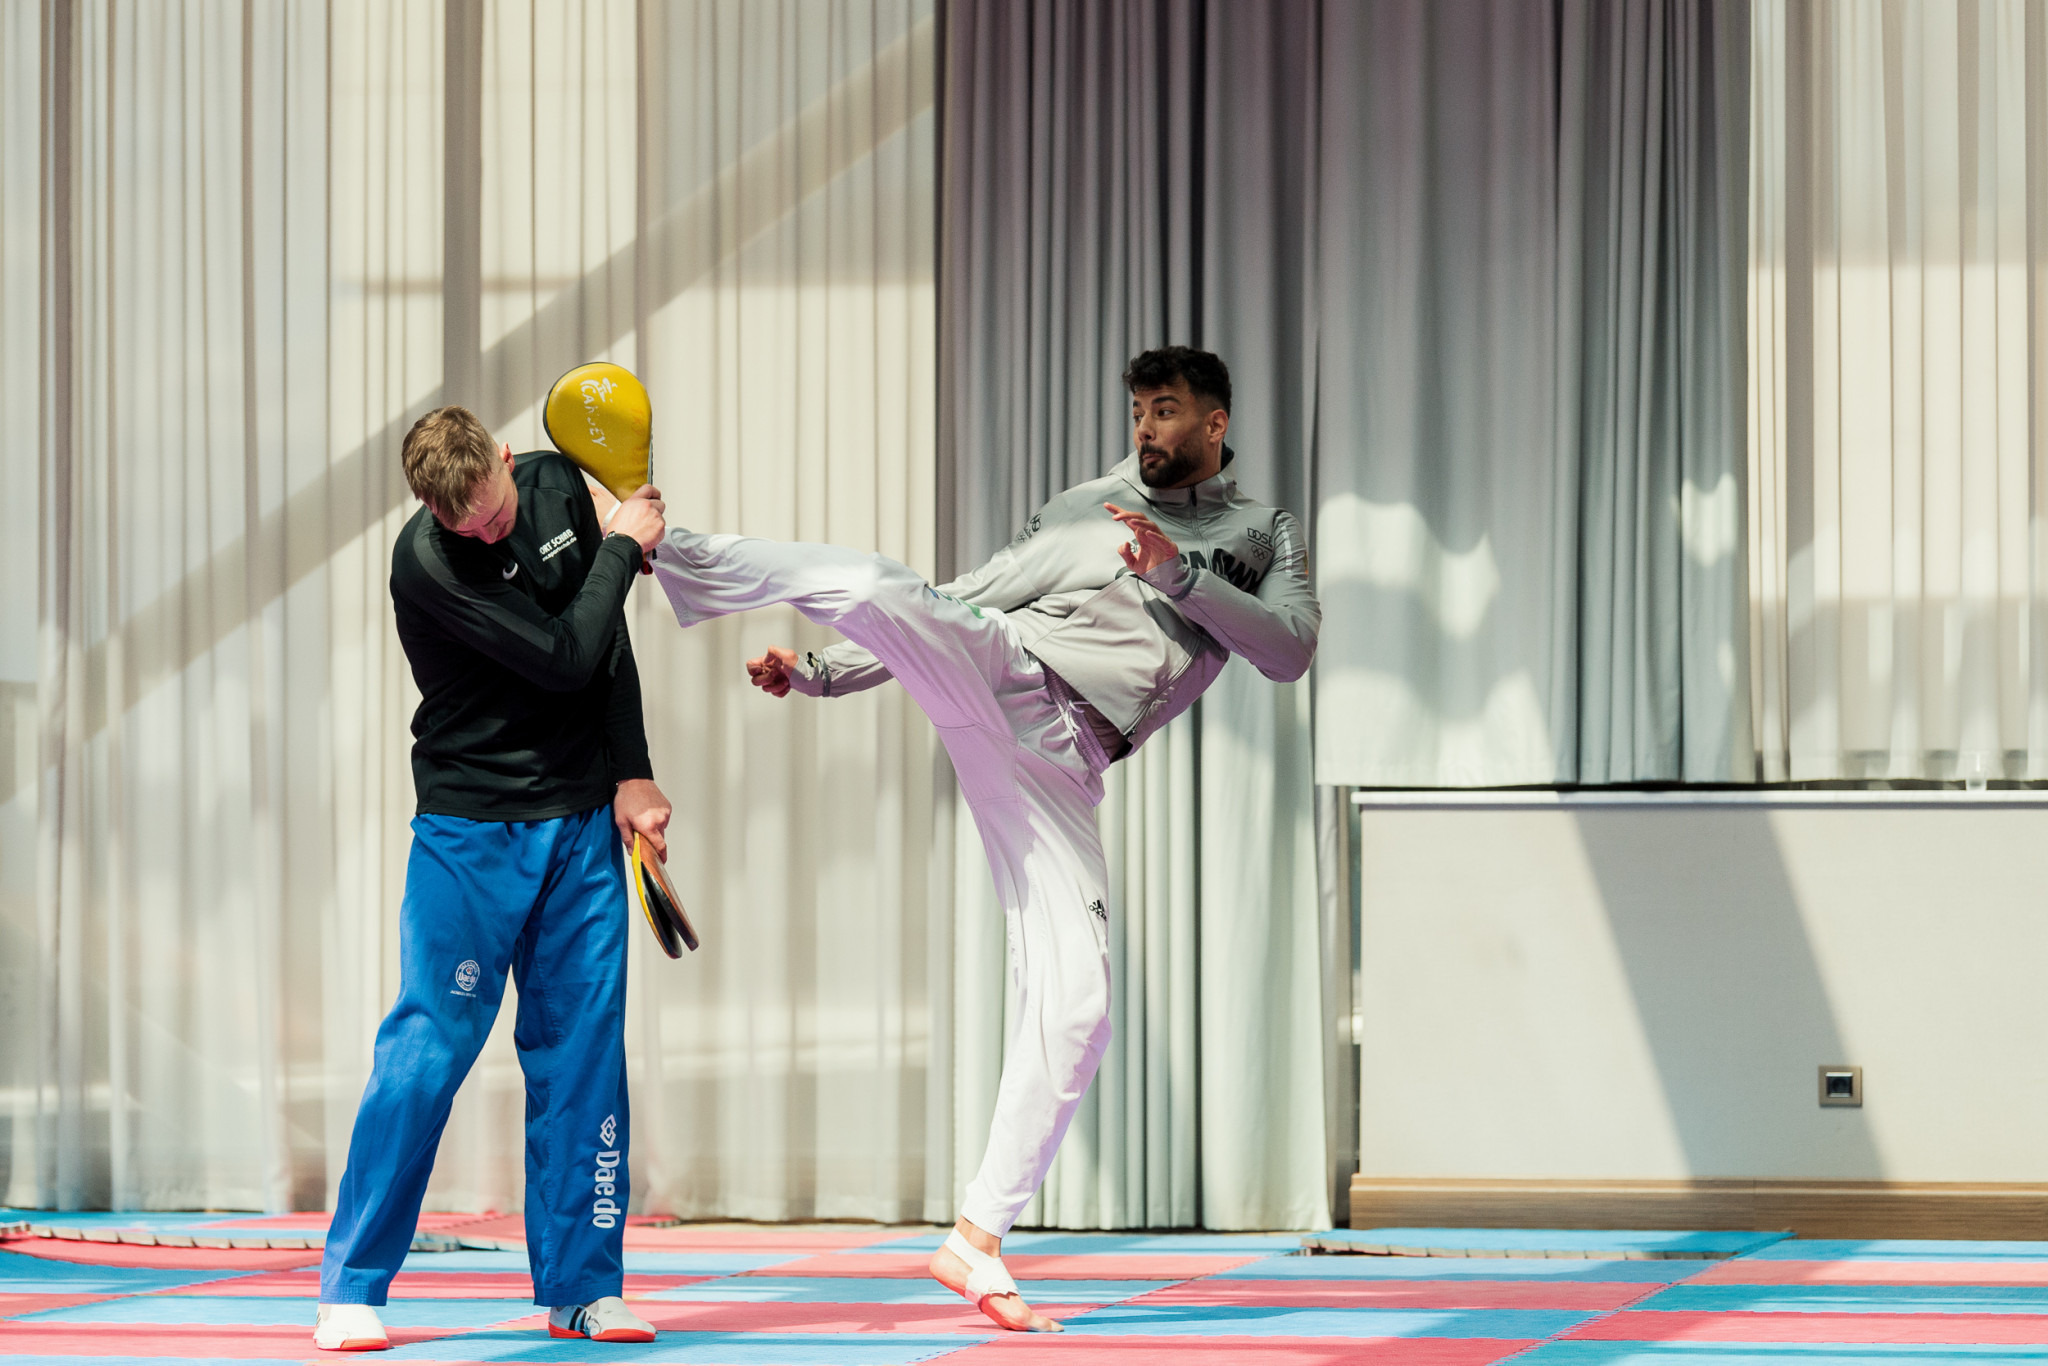 Training is underway at the Grand Hotel Millennium Sofia ahead of the European Qualification Tournament for Tokyo 2020 being organised by Taekwondo Europe ©Taekwondo Europe